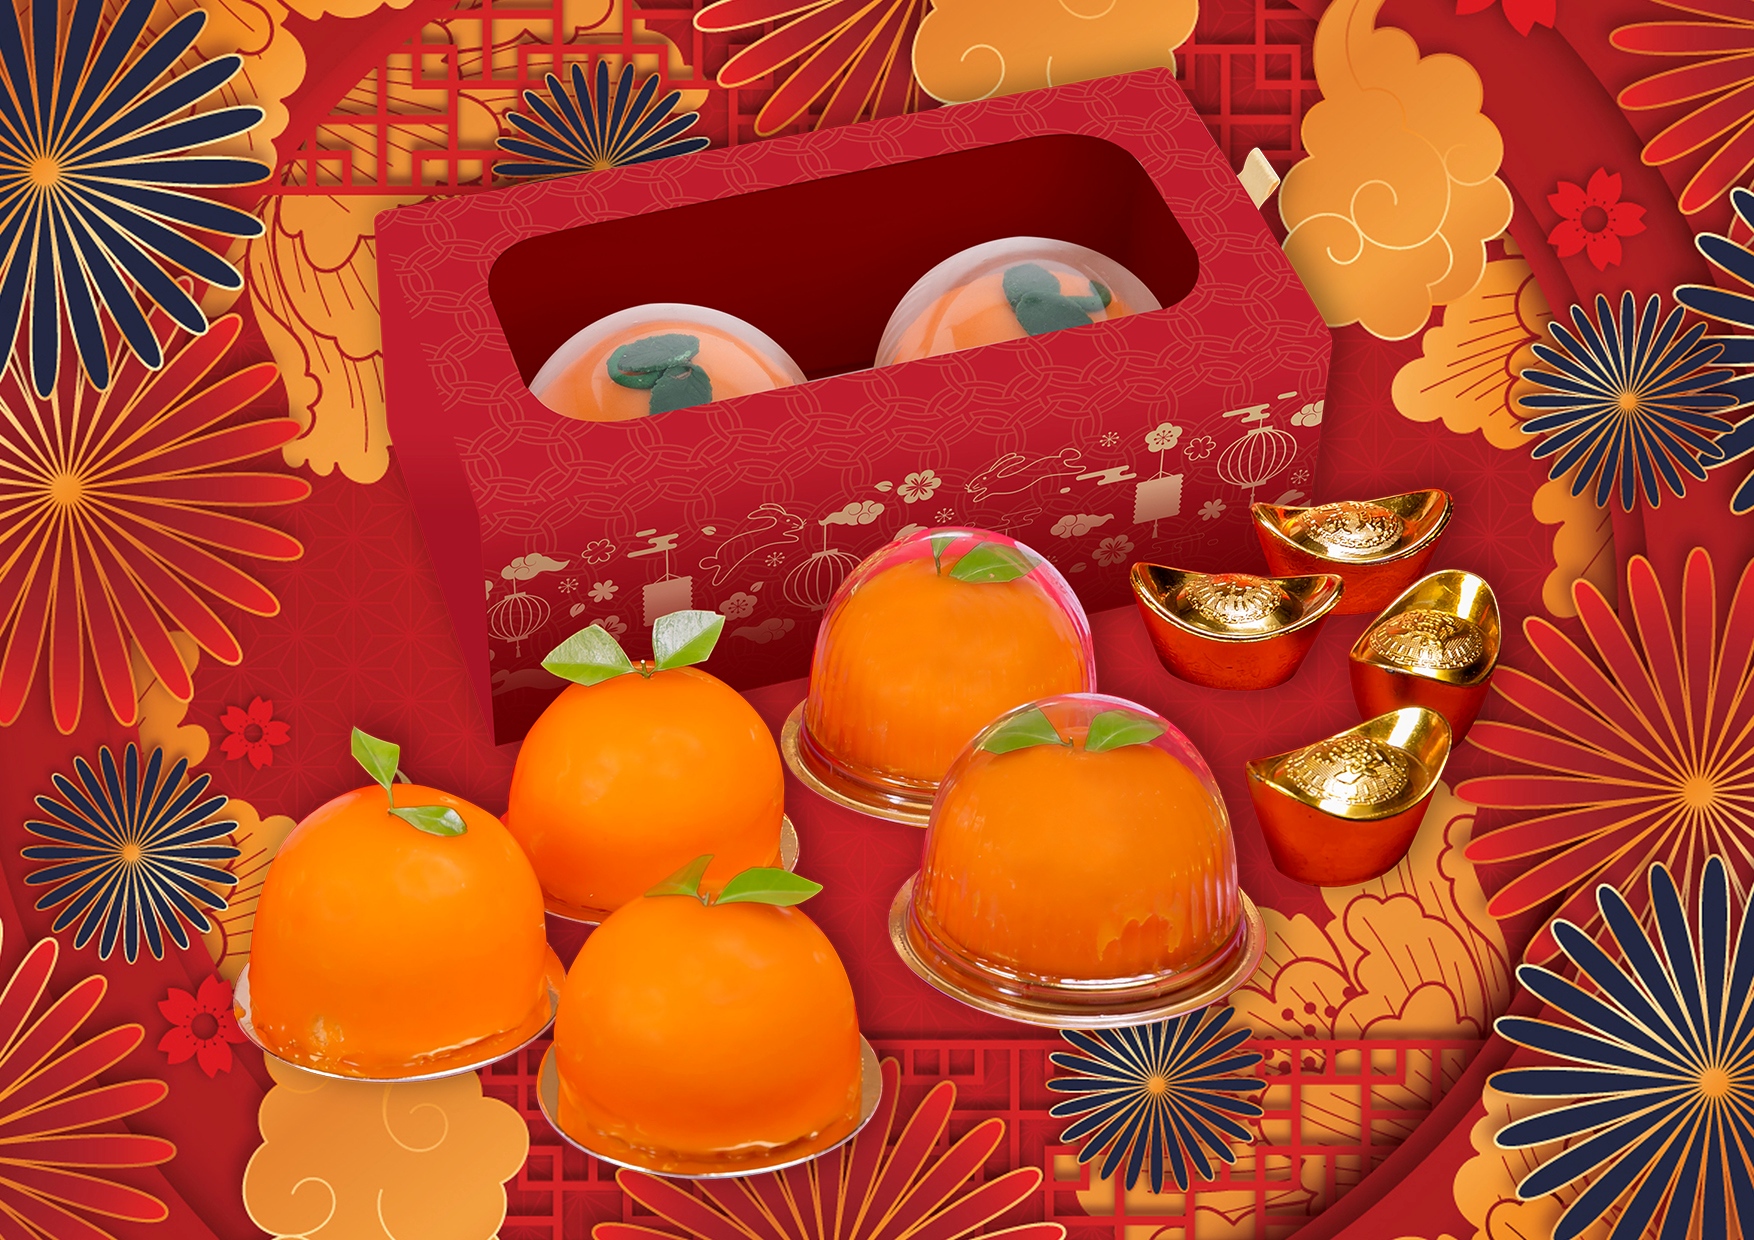 Get Your Good Luck On with the delicious “Lucky Orange”